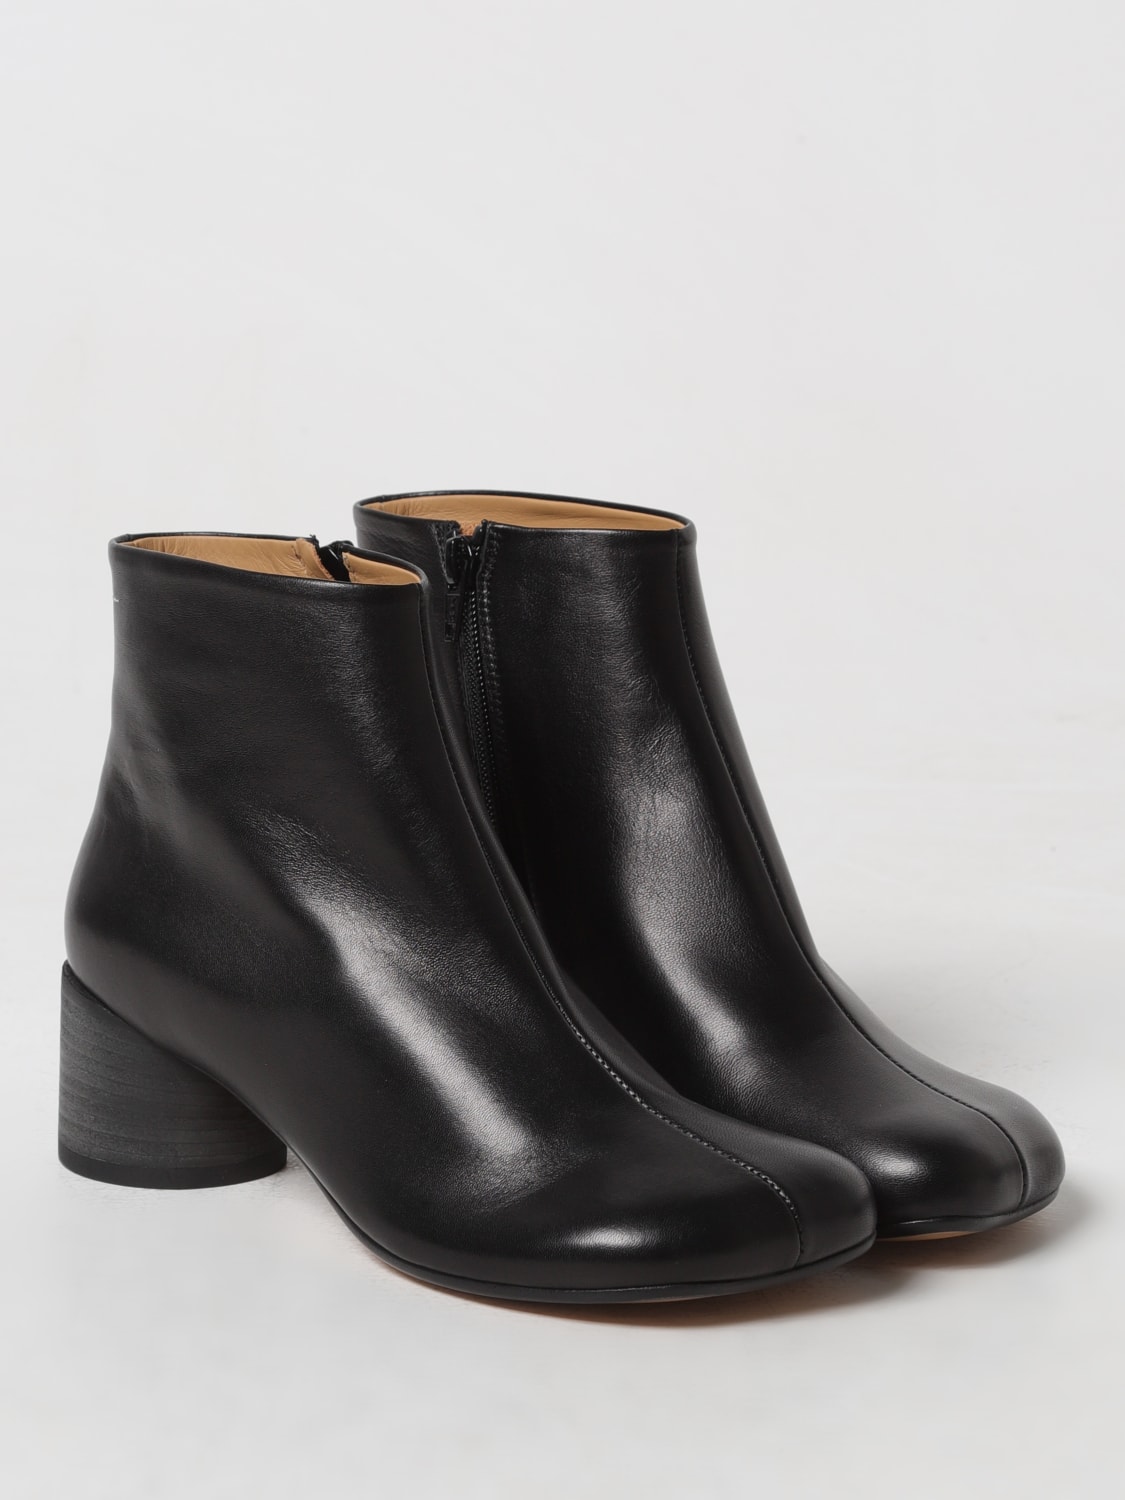 MM6 MAISON MARGIELA: Flat ankle boots woman - Black | Mm6 Maison Margiela  flat ankle boots S59WU0173P3628 online at GIGLIO.COM